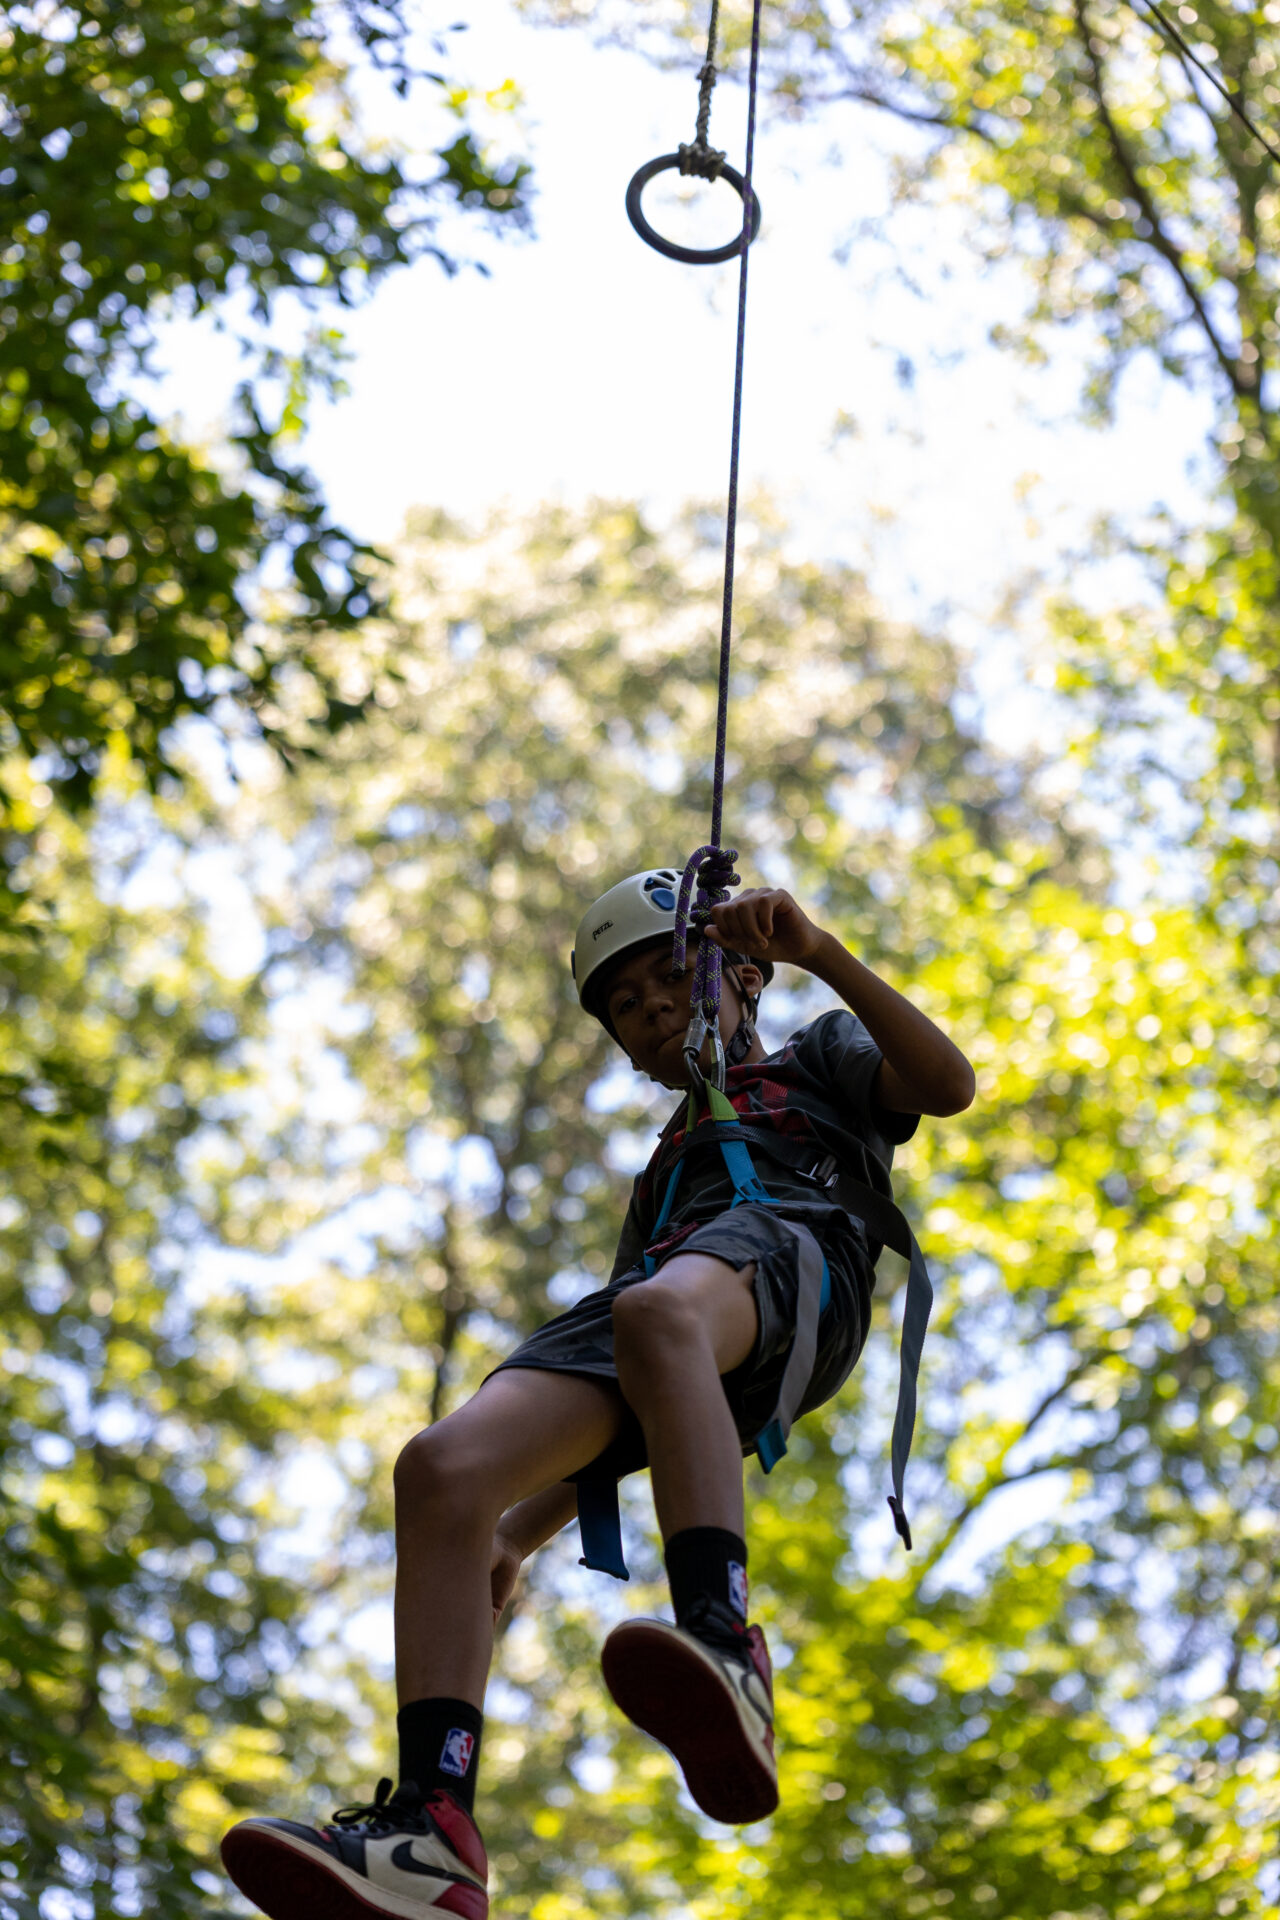 A thrilling BearTrax adventure where a person soars through the air on a zip line, embracing the excitement and adrenaline rush of being suspended high above the ground.